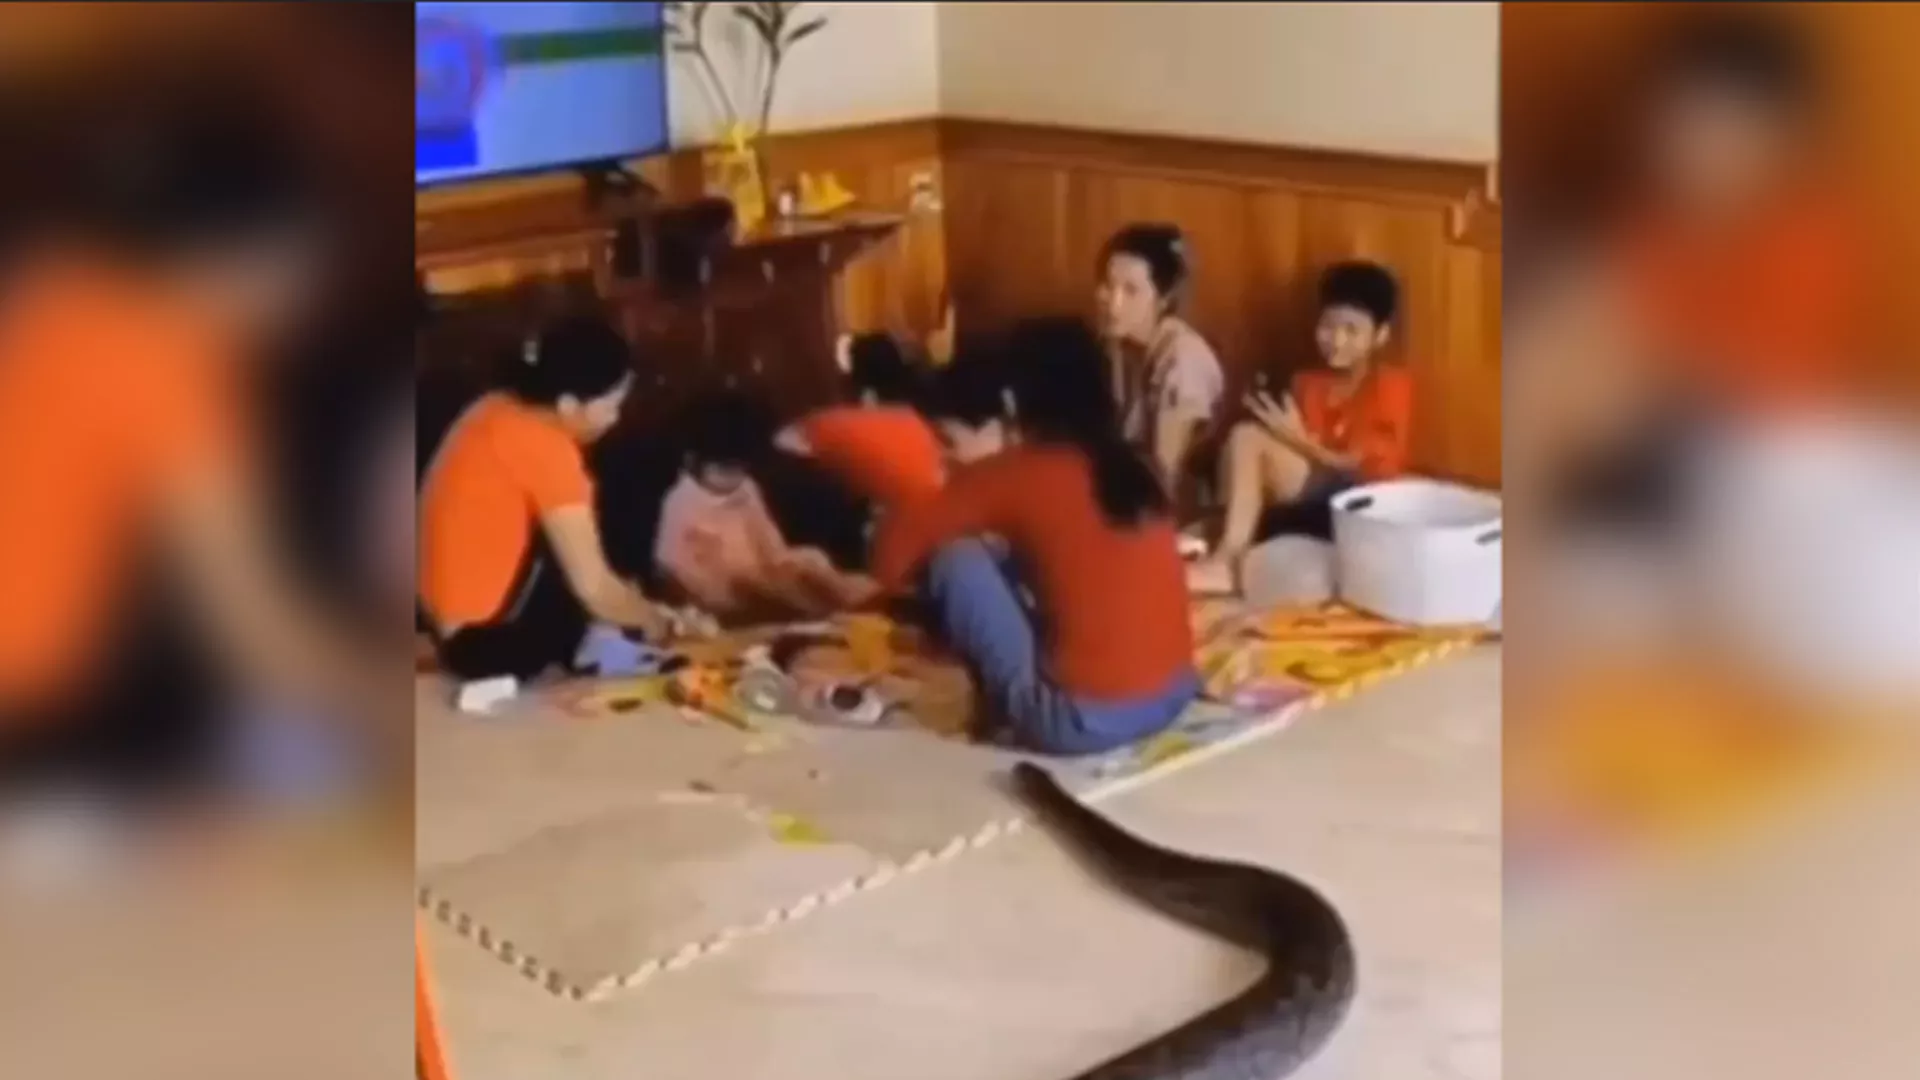 Python Breaks into Home Causes Panic Video Goes Viral